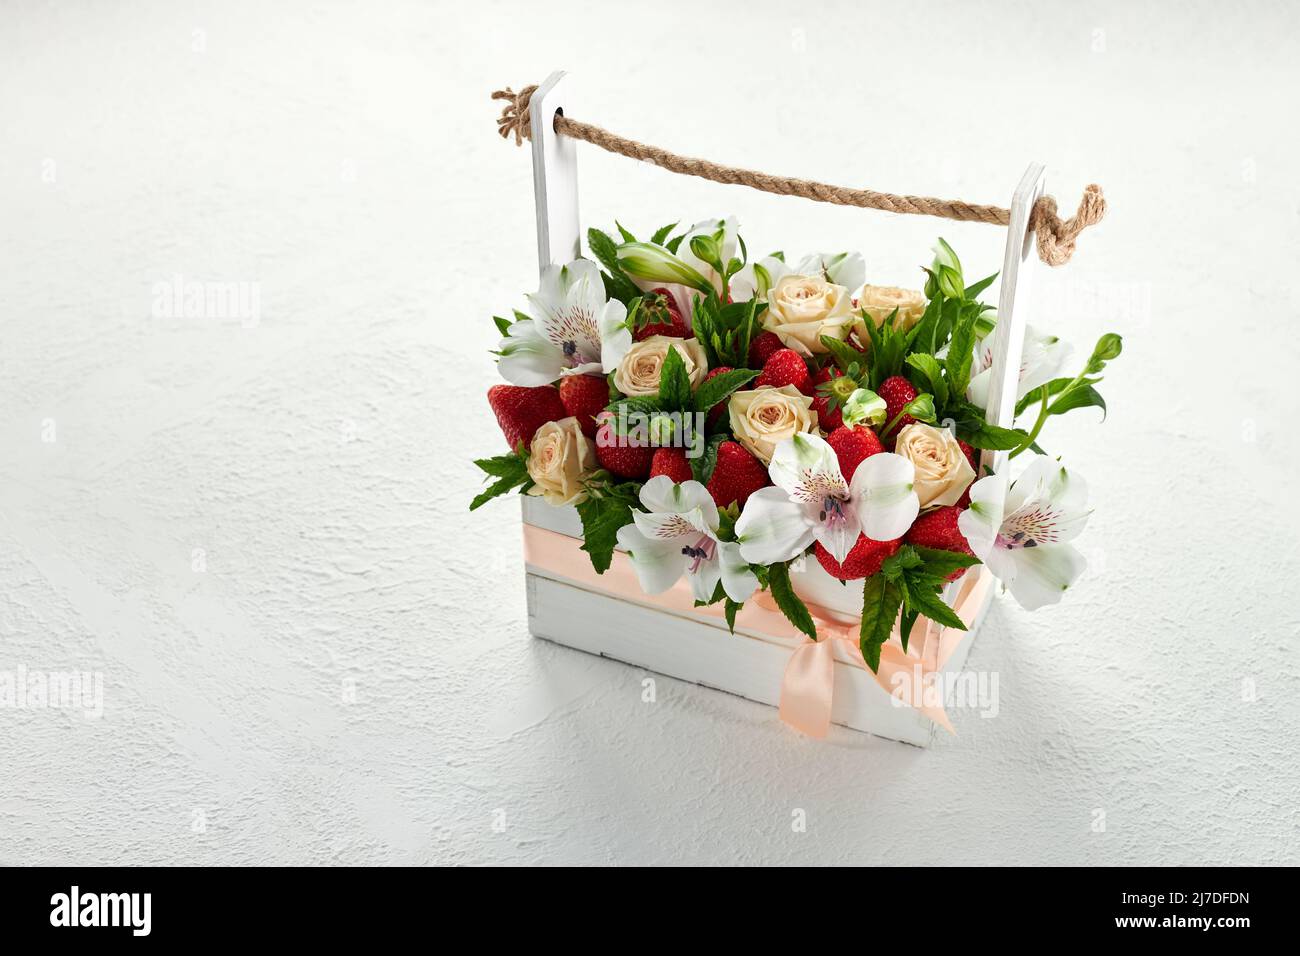 Wooden box filled with ripe strawberries and beautiful white and pink flowers on a white background Stock Photo